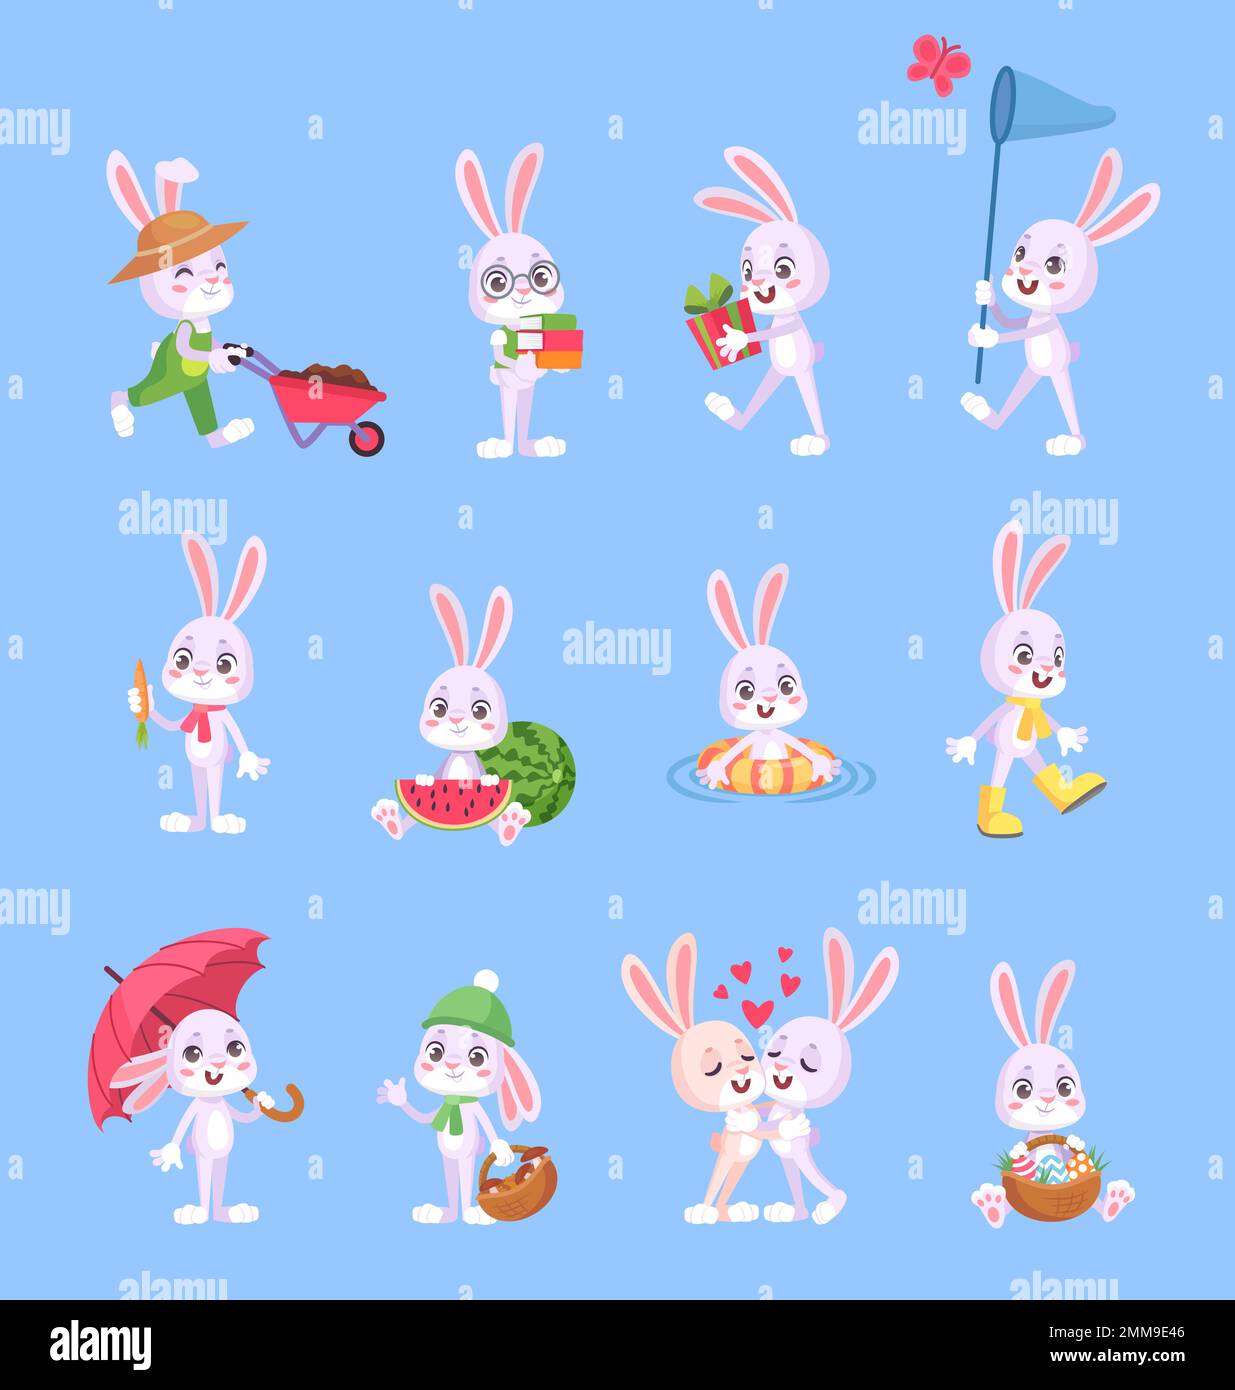 Button Shapes Clipart by Bunny On A Cloud by Bunny On A Cloud